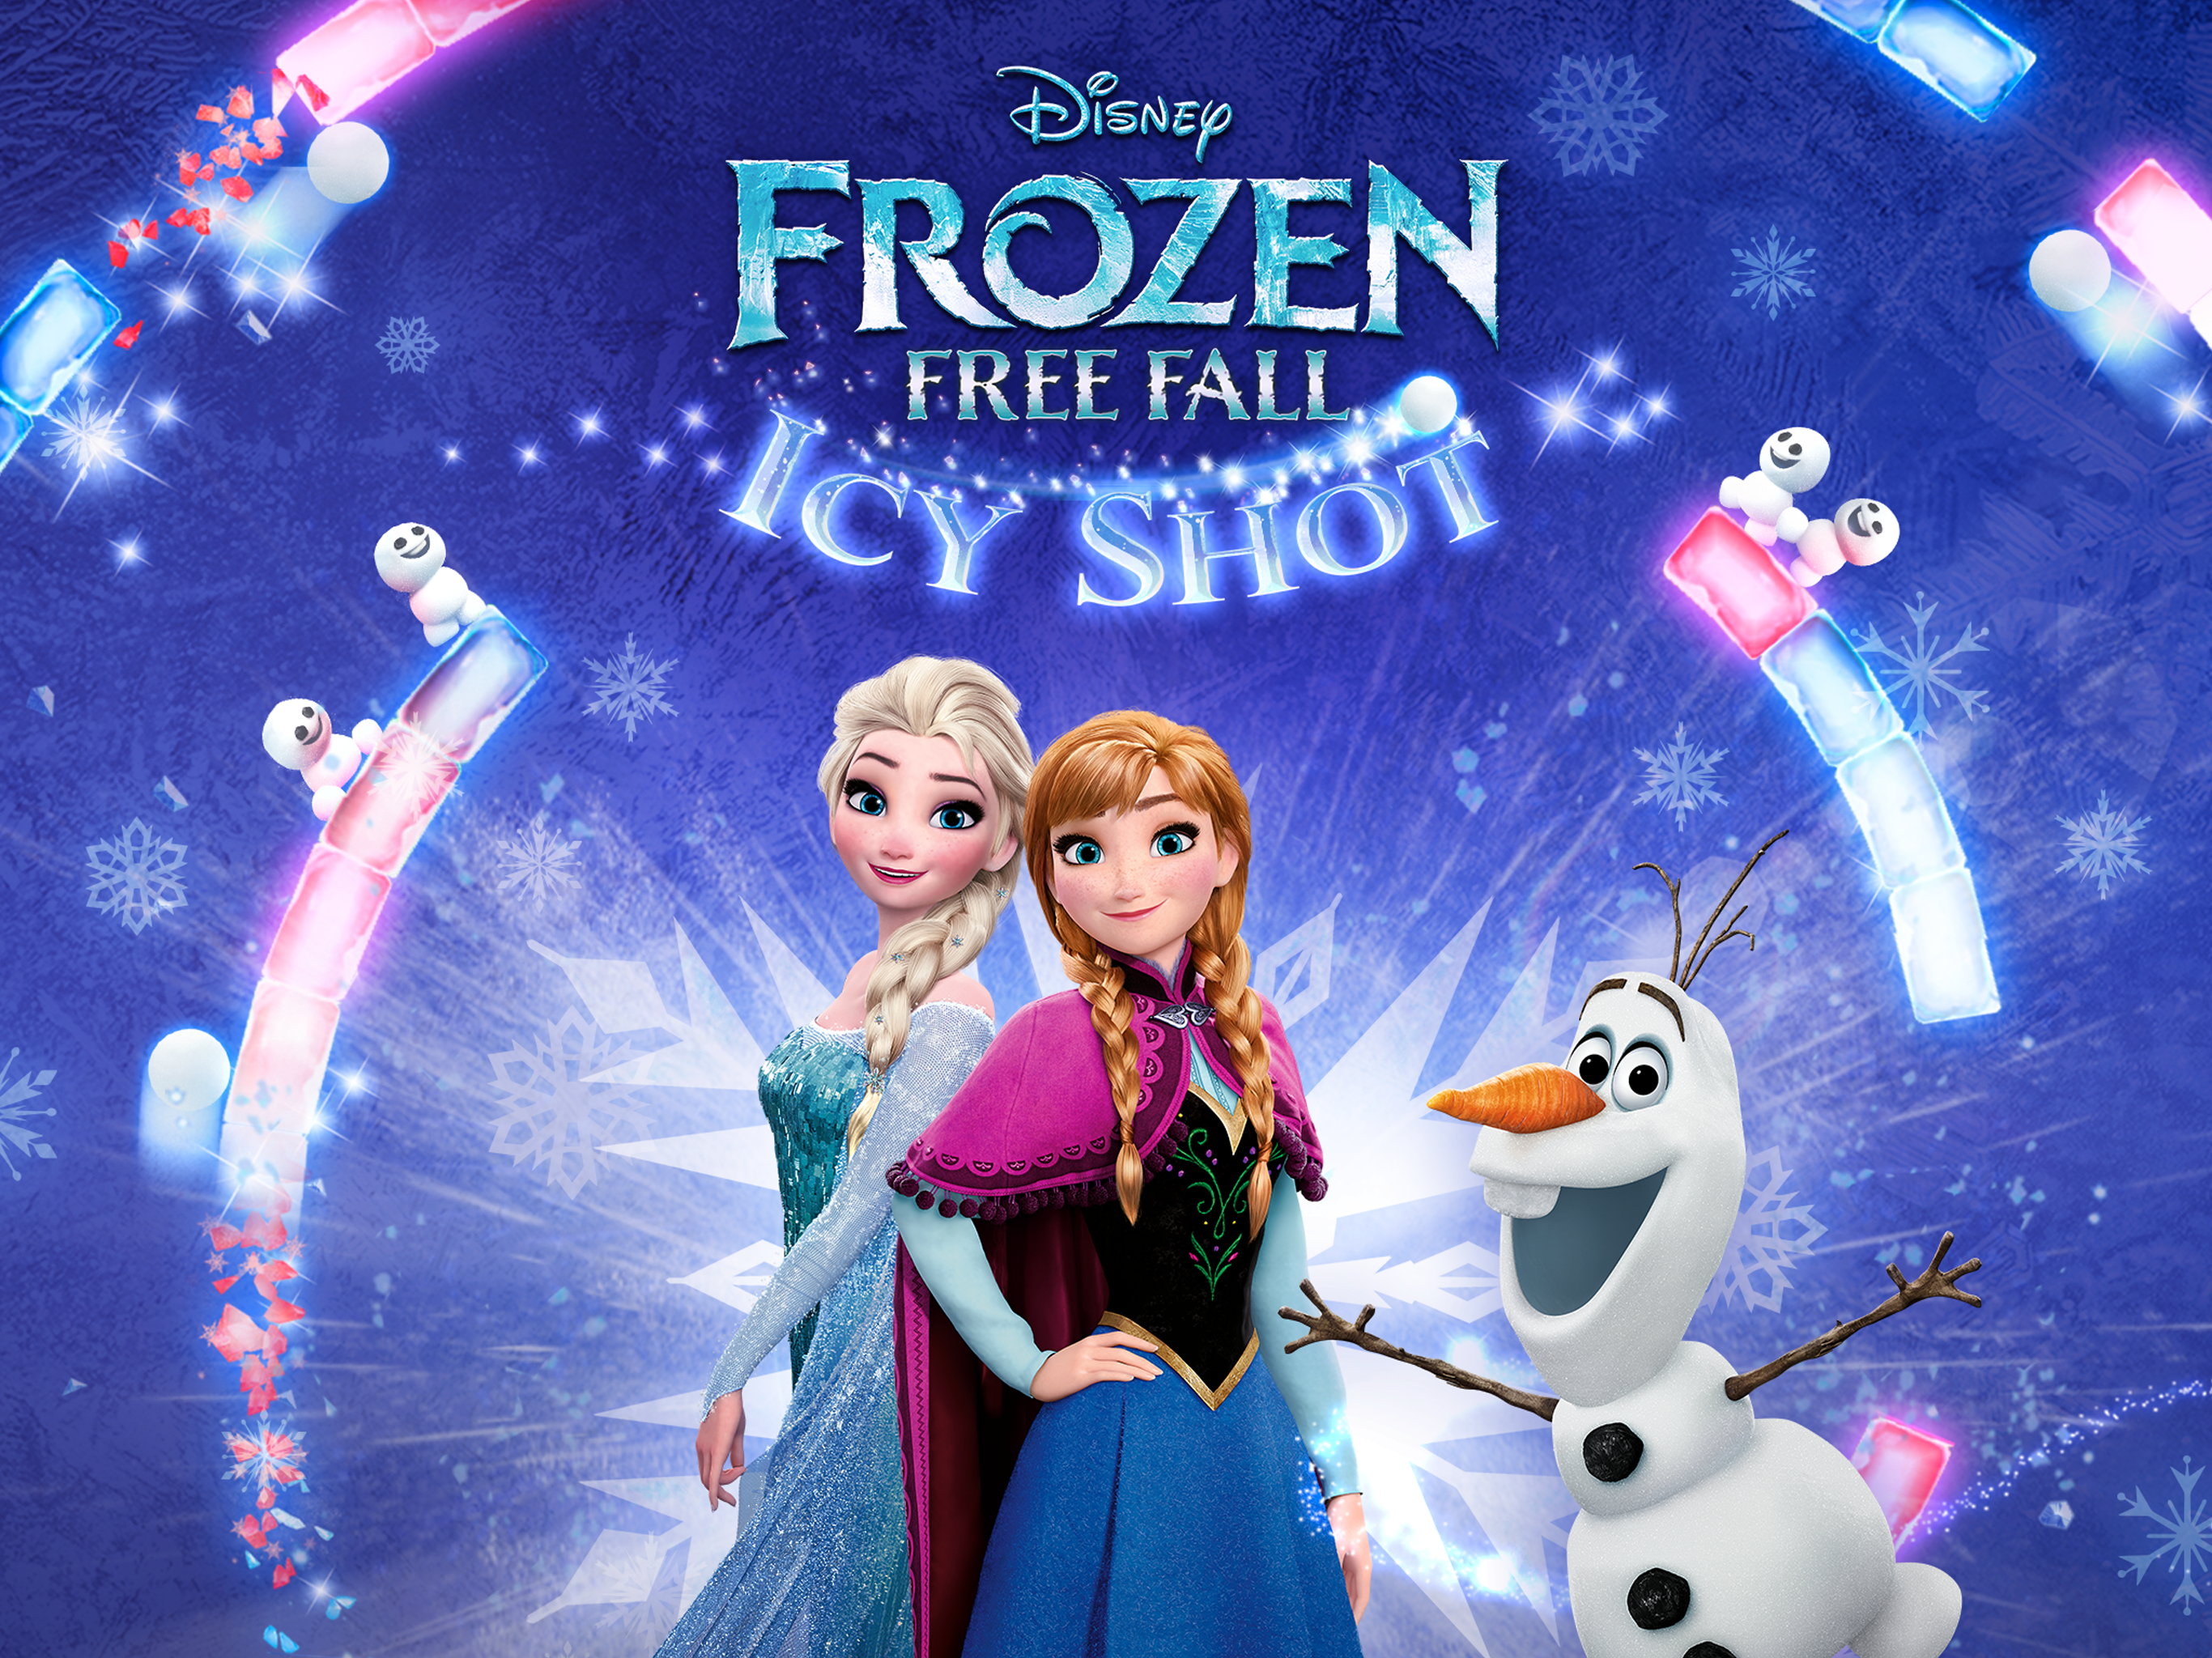 For the First Time in Forever…It’s Time to Play! ‘Frozen Free Fall: Icy Shot’ Launches Today for Mobile Devices